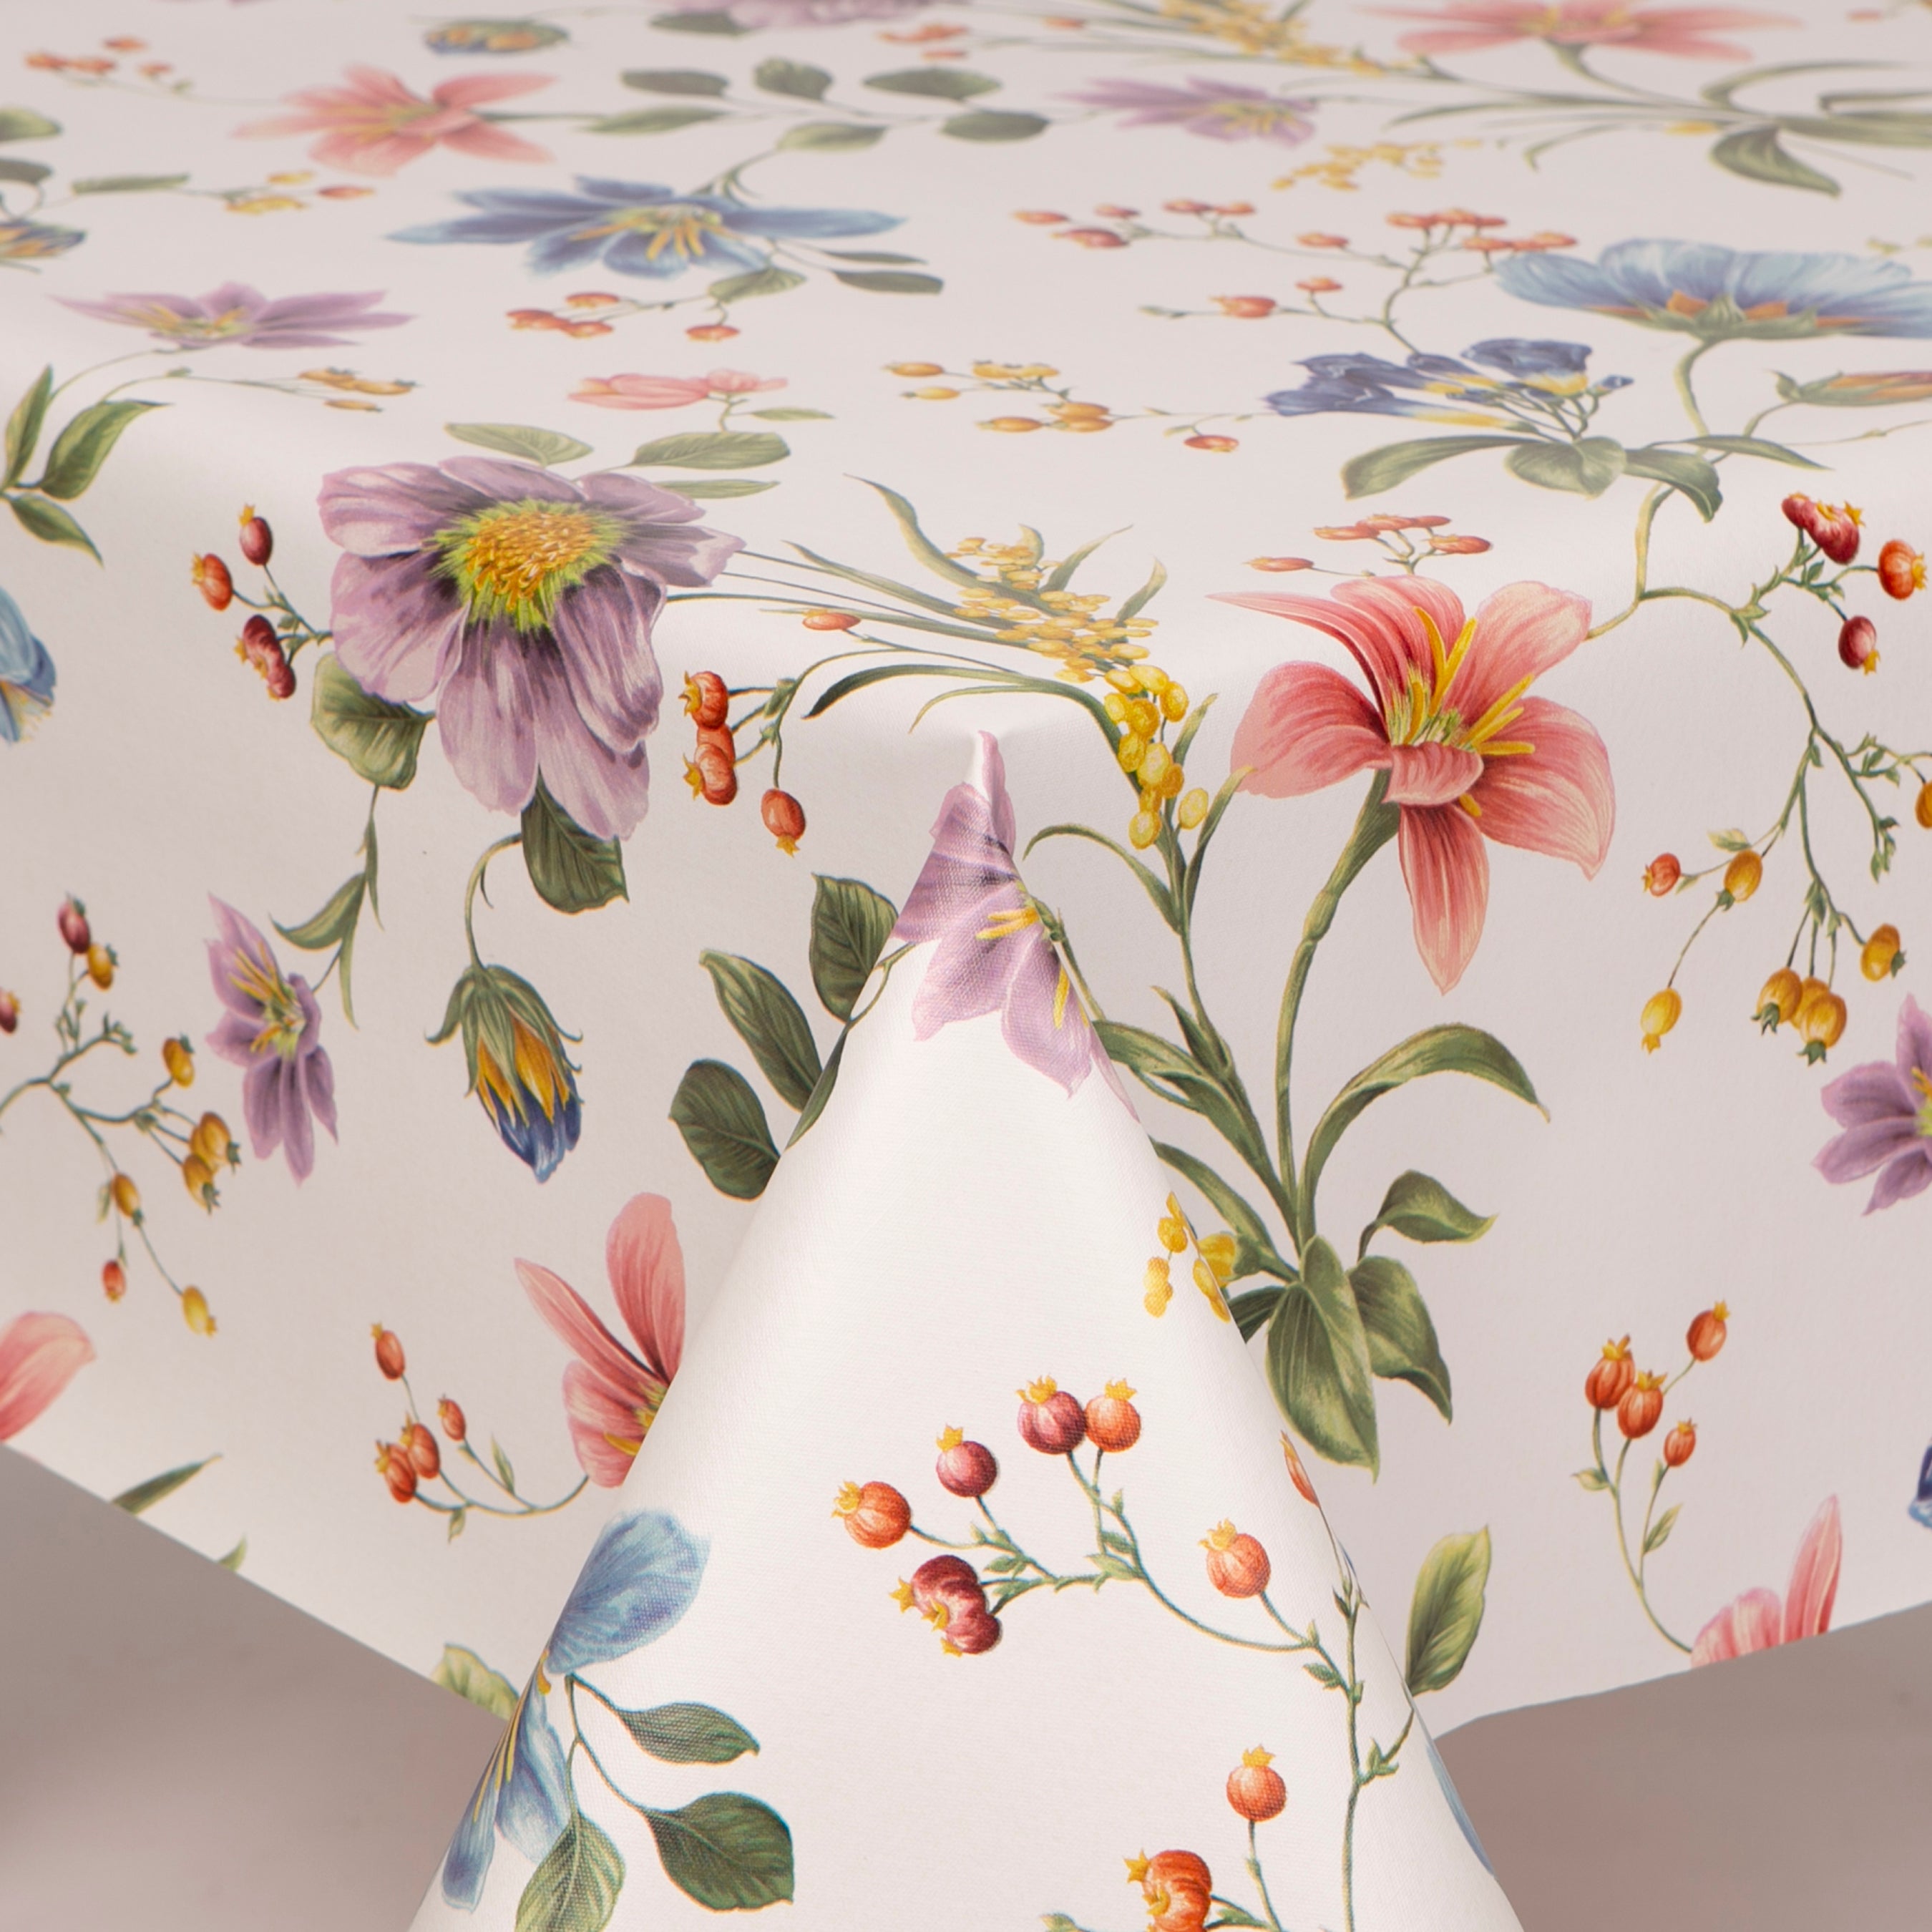 Ava Pretty Floral PVC Wipe Clean Vinyl Table Covering / Table Cloth